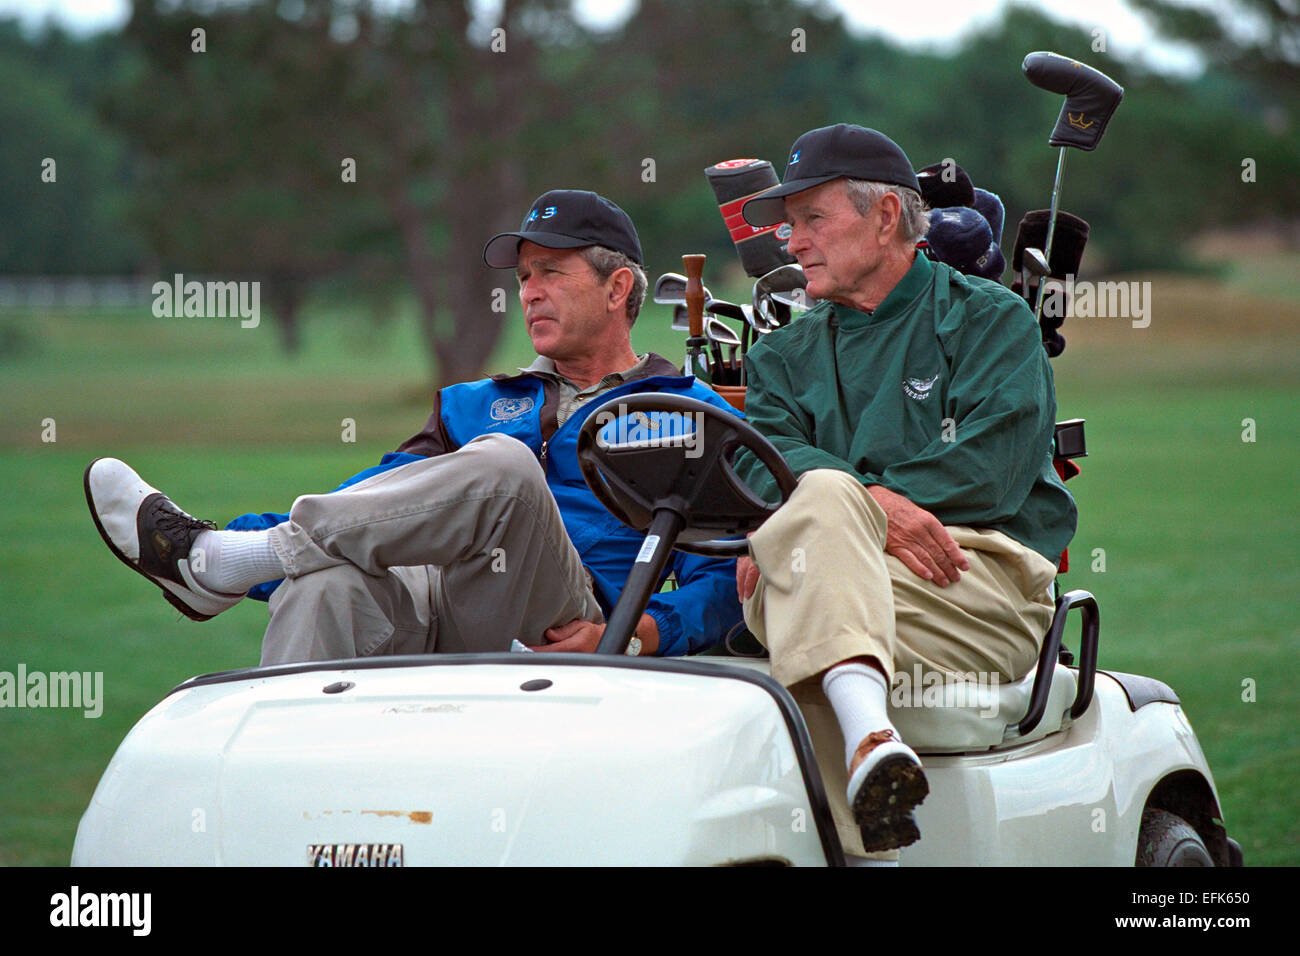 US President George W. Bush sits in a golf cart with his father former President George H.W. Bush during a round at Cape Arundel Golf Club July 6, 2001 in Kennebunkport, Maine. Stock Photo